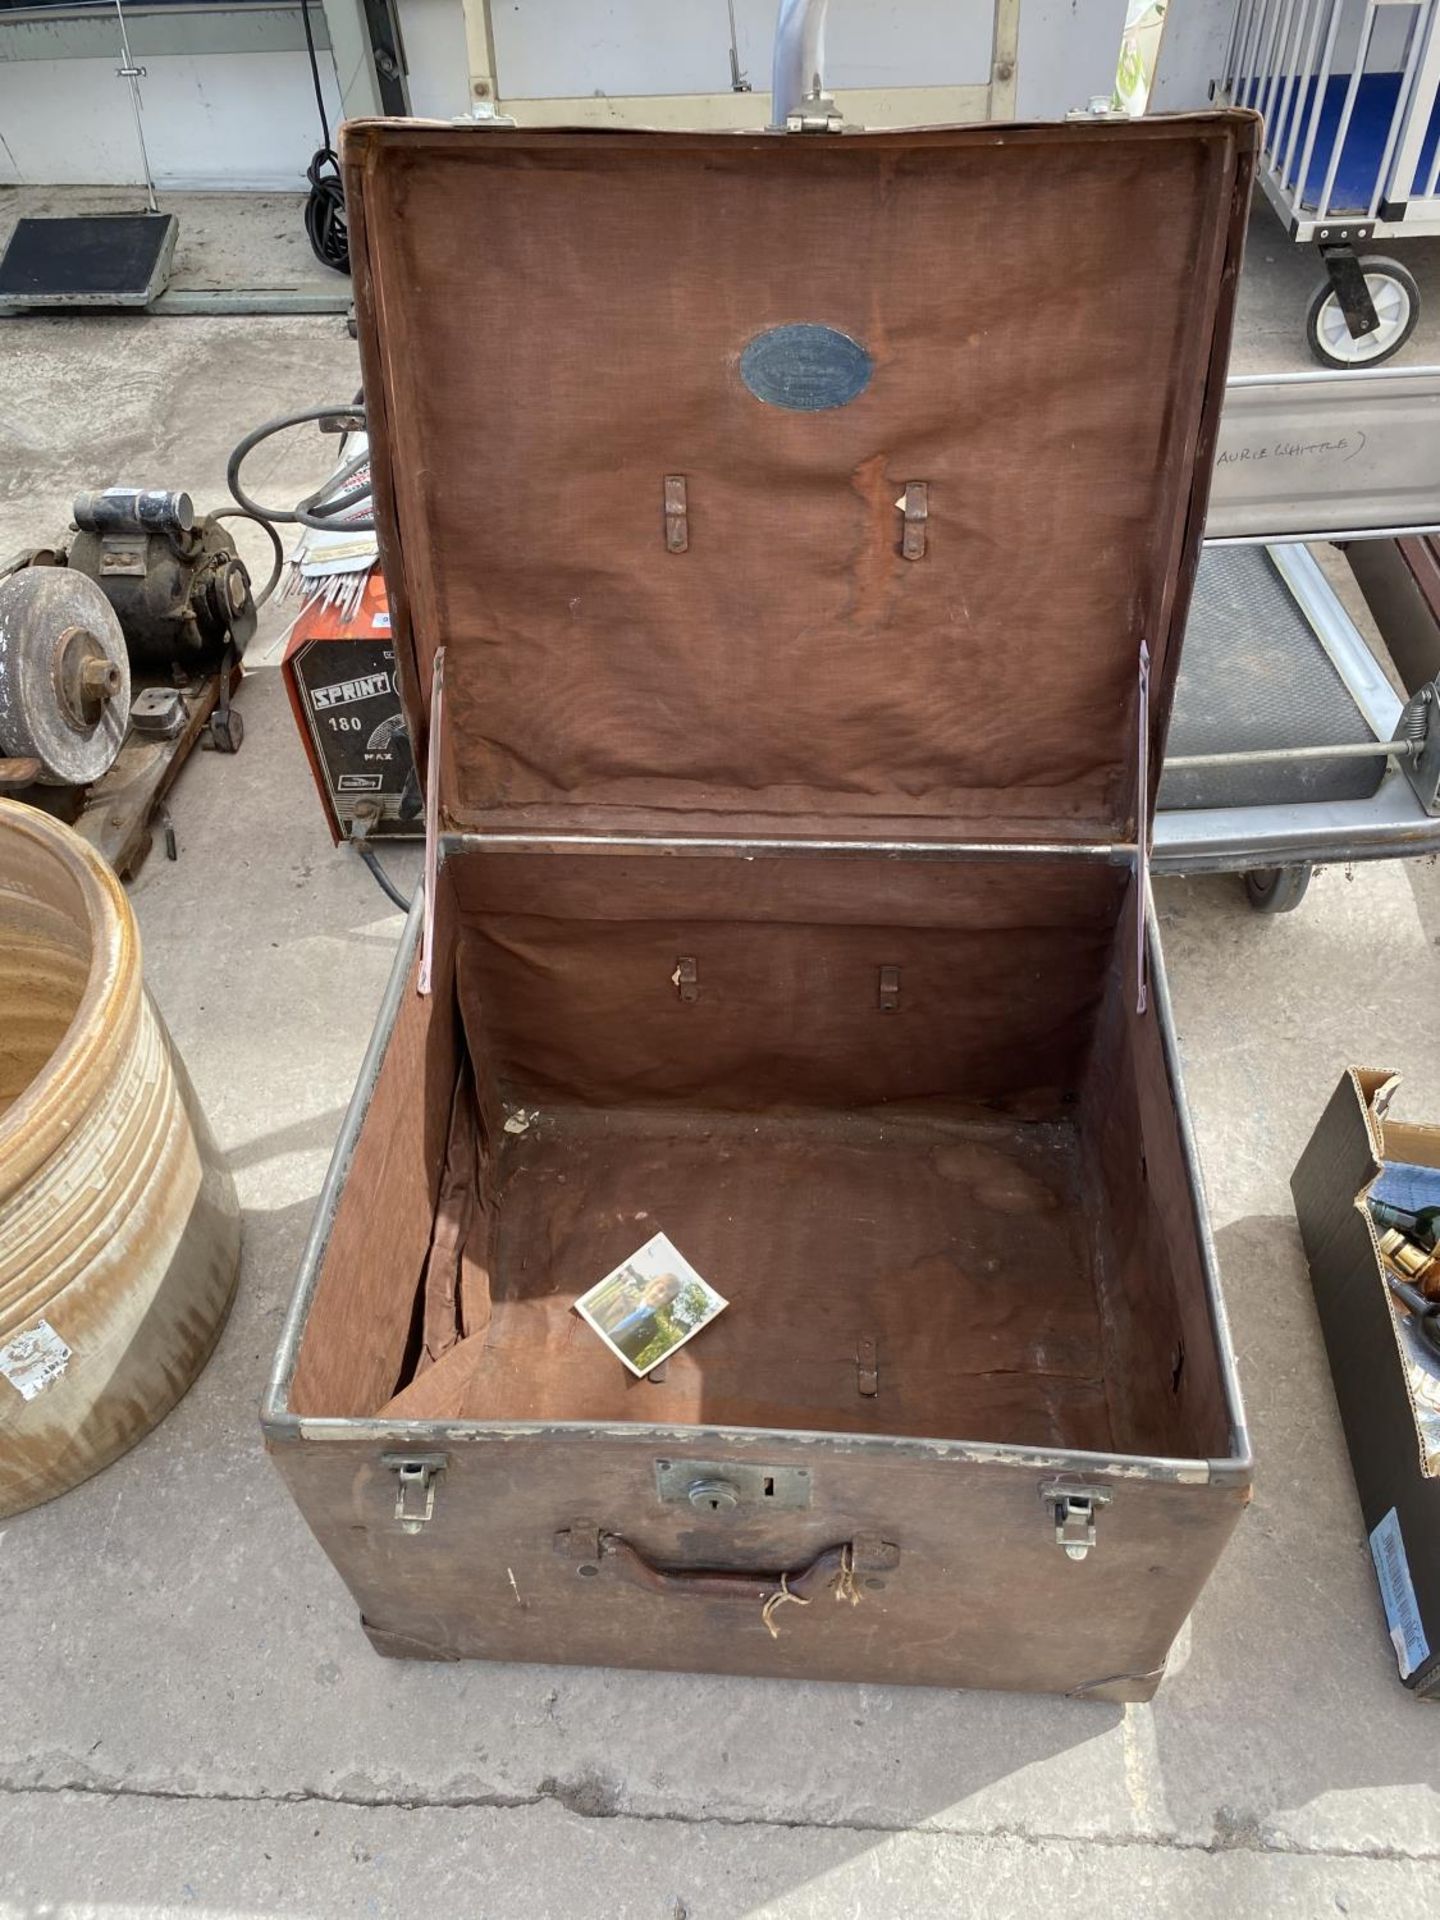 A VINTAGE TRAVEL TRUNK - Image 4 of 5